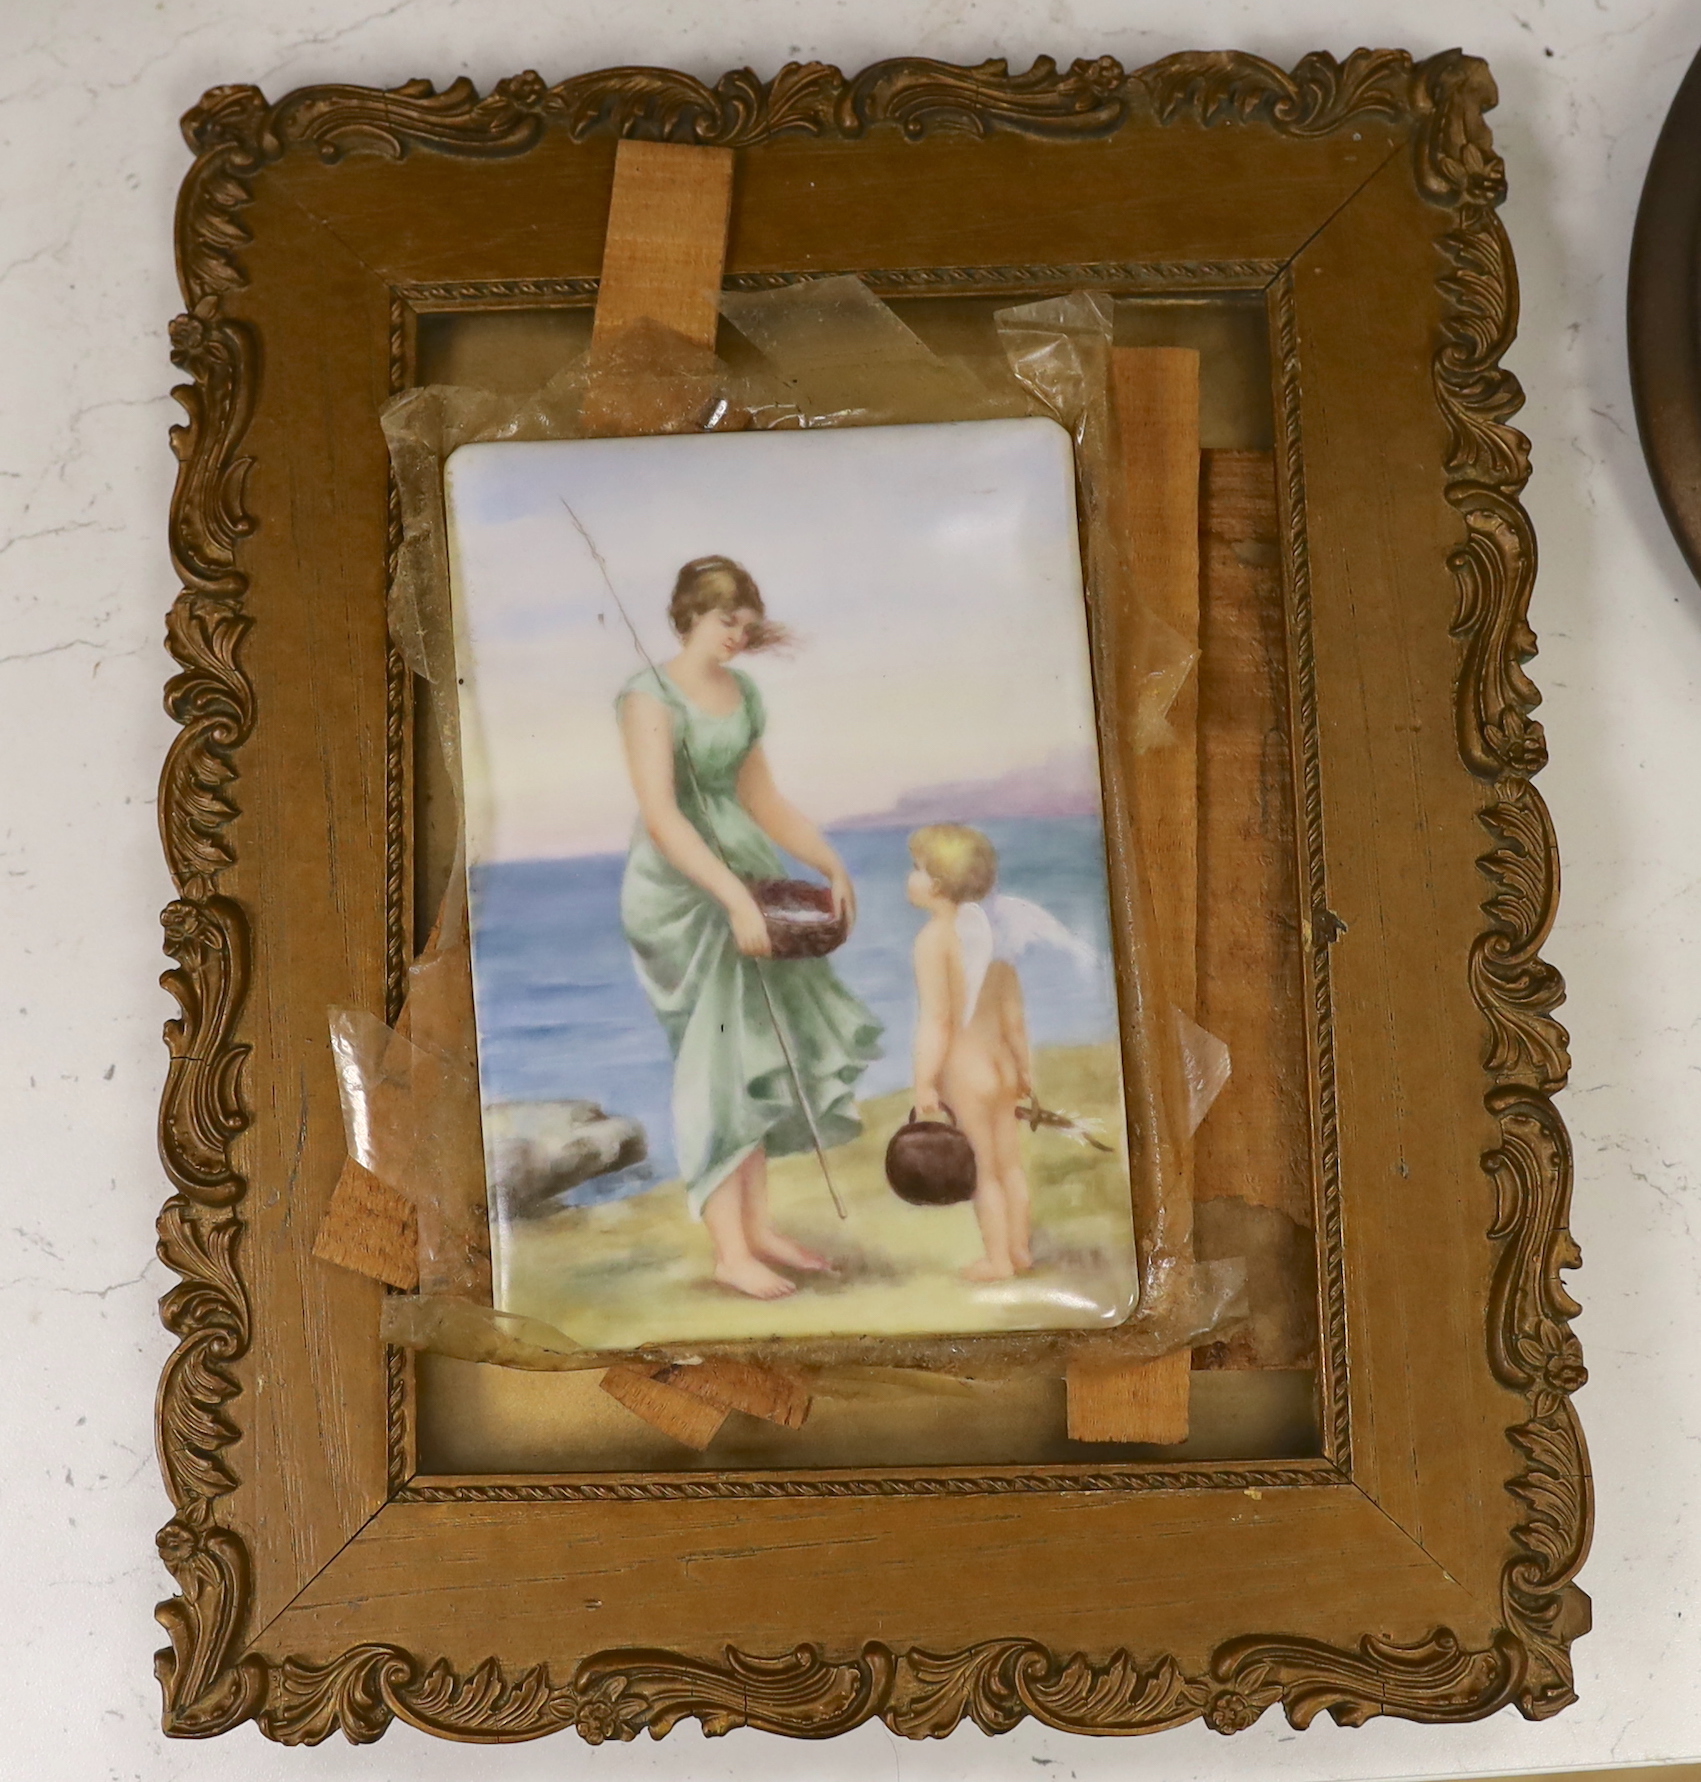 A Continental porcelain plaque painted with a woman and putti on a beach, 17 x 12cm